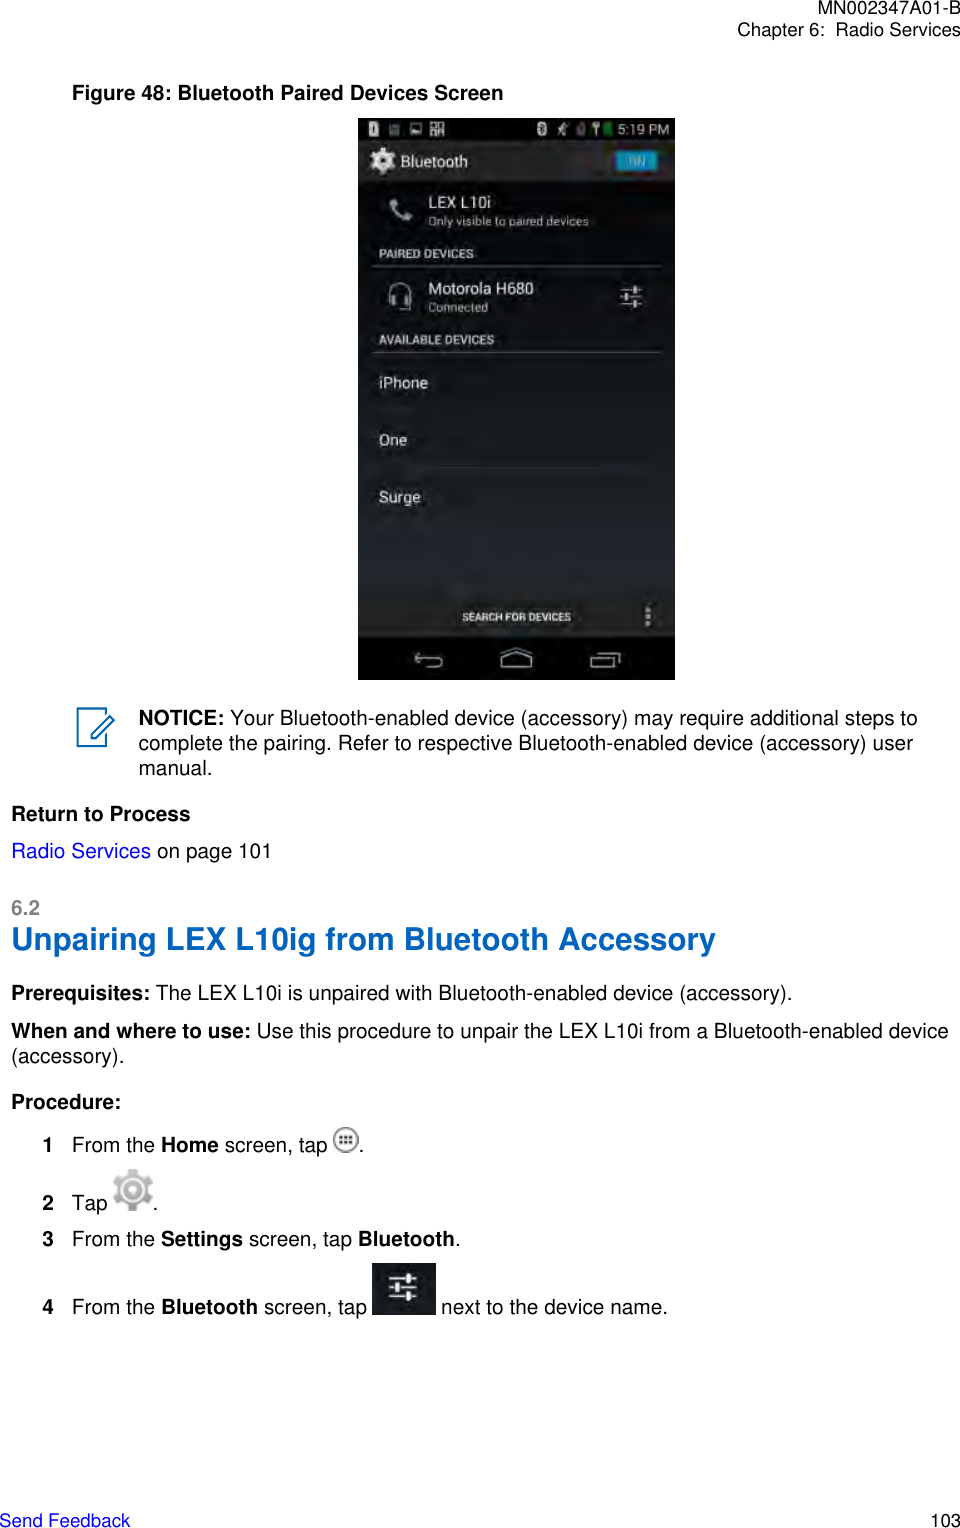 Figure 48: Bluetooth Paired Devices ScreenNOTICE: Your Bluetooth-enabled device (accessory) may require additional steps tocomplete the pairing. Refer to respective Bluetooth-enabled device (accessory) usermanual.Return to ProcessRadio Services on page 1016.2Unpairing LEX L10ig from Bluetooth AccessoryPrerequisites: The LEX L10i is unpaired with Bluetooth-enabled device (accessory).When and where to use: Use this procedure to unpair the LEX L10i from a Bluetooth-enabled device(accessory).Procedure:1From the Home screen, tap  .2Tap  .3From the Settings screen, tap Bluetooth.4From the Bluetooth screen, tap   next to the device name.MN002347A01-BChapter 6:  Radio ServicesSend Feedback   103